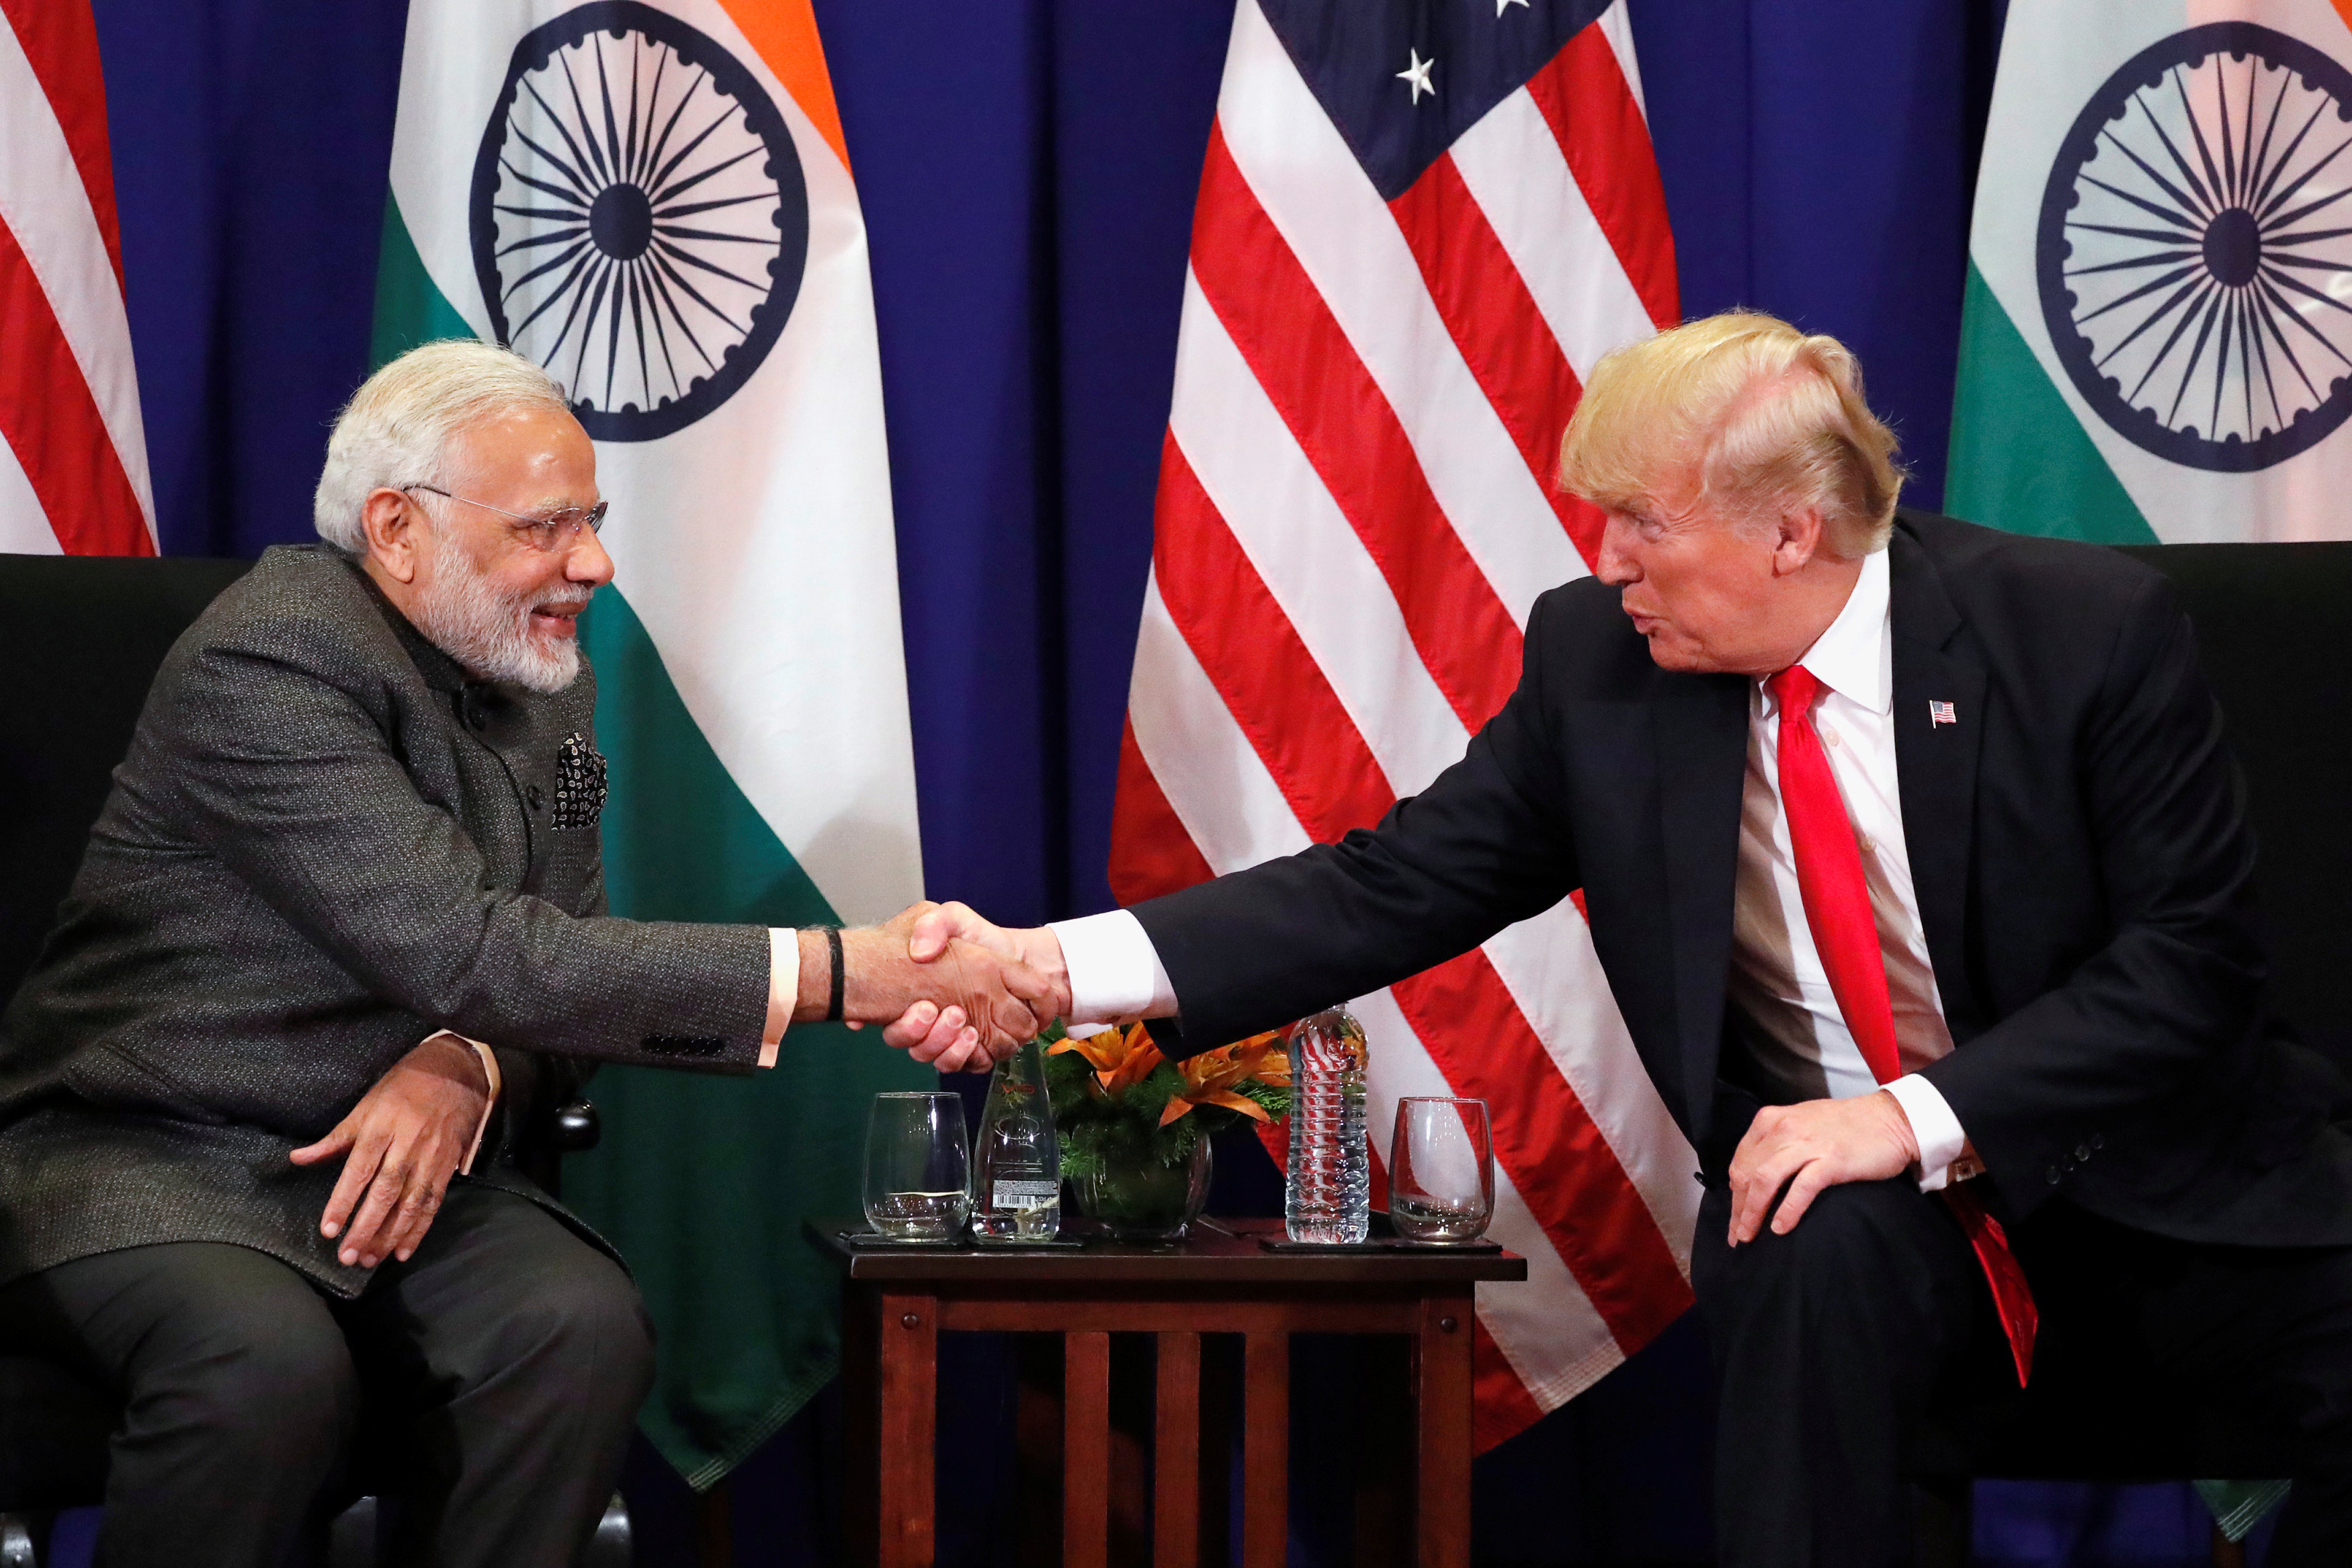 US President Donald Trump shakes hands with India's Prime Minister Narendra Modi during a bilateral meeting alongside the Asean Summit in Manila, Philippines November 13, 2017. u00e2u20acu201d Reuters pic